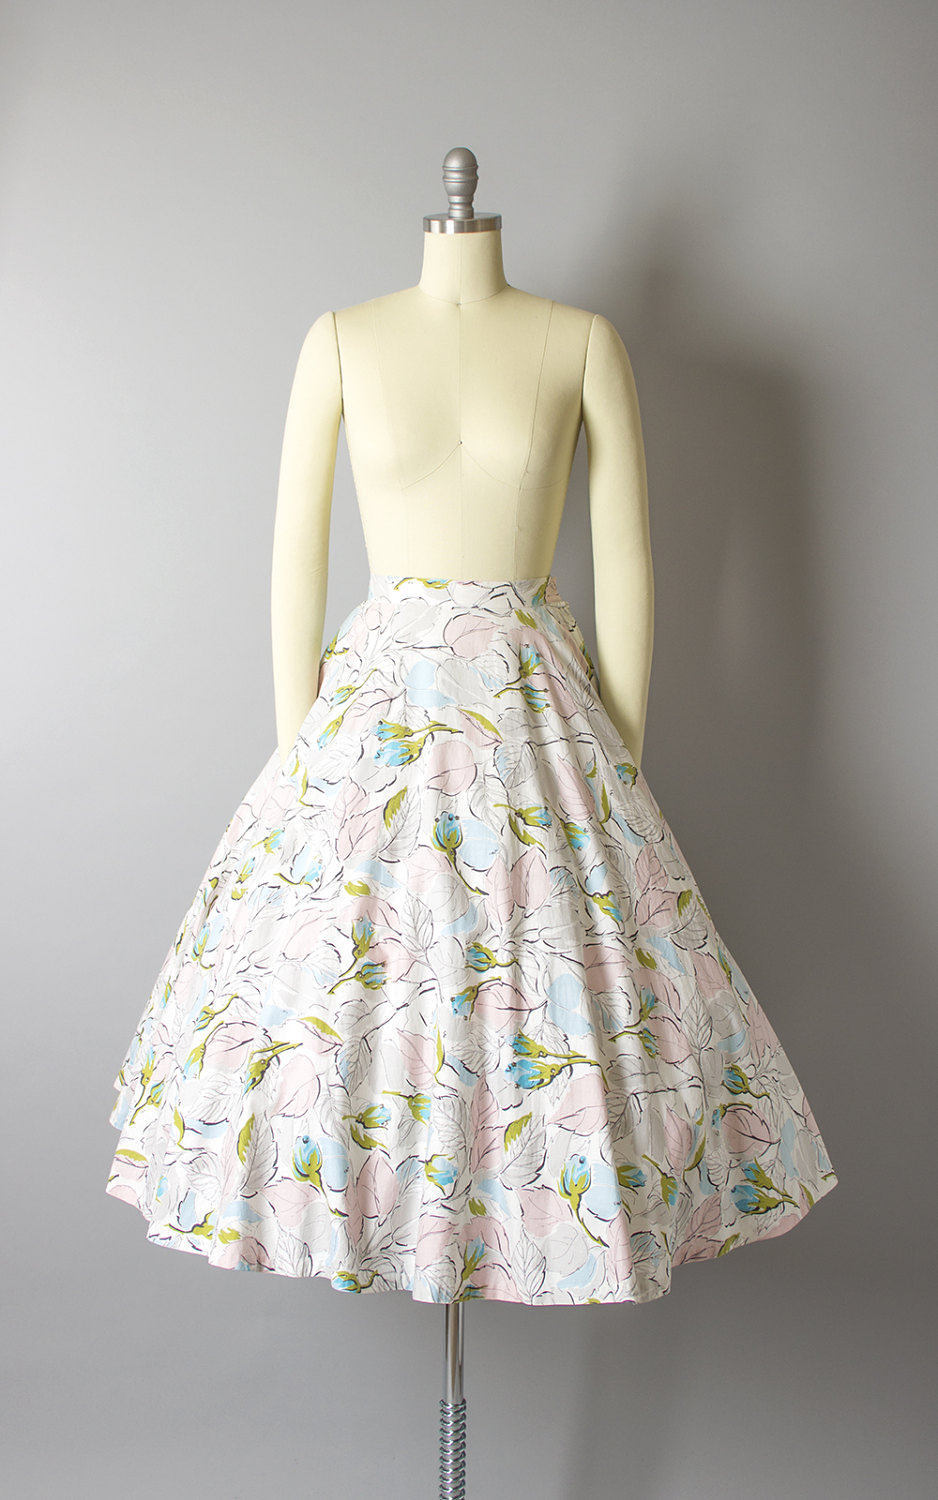 Vintage 1950s Skirt | 50s JERRY GILDEN Rose Floral Cotton Rhinestones Full Circle Skirt with Pockets (small)